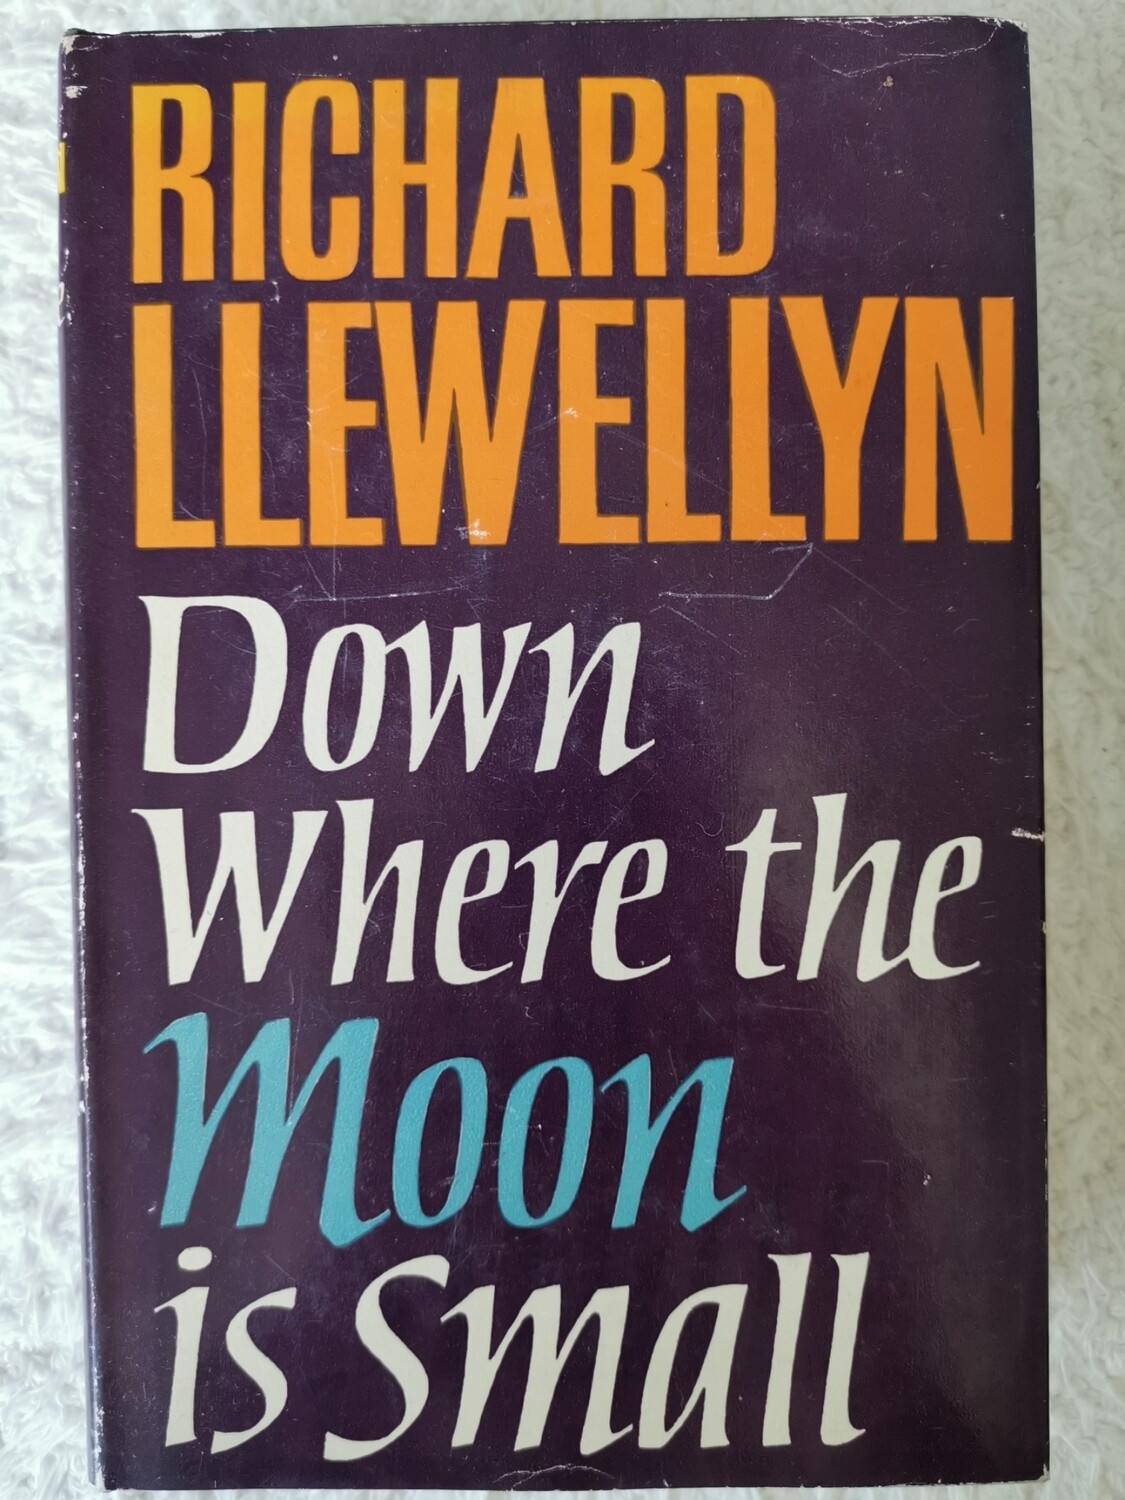 Down where the moon is small, Richard Llewellyn 